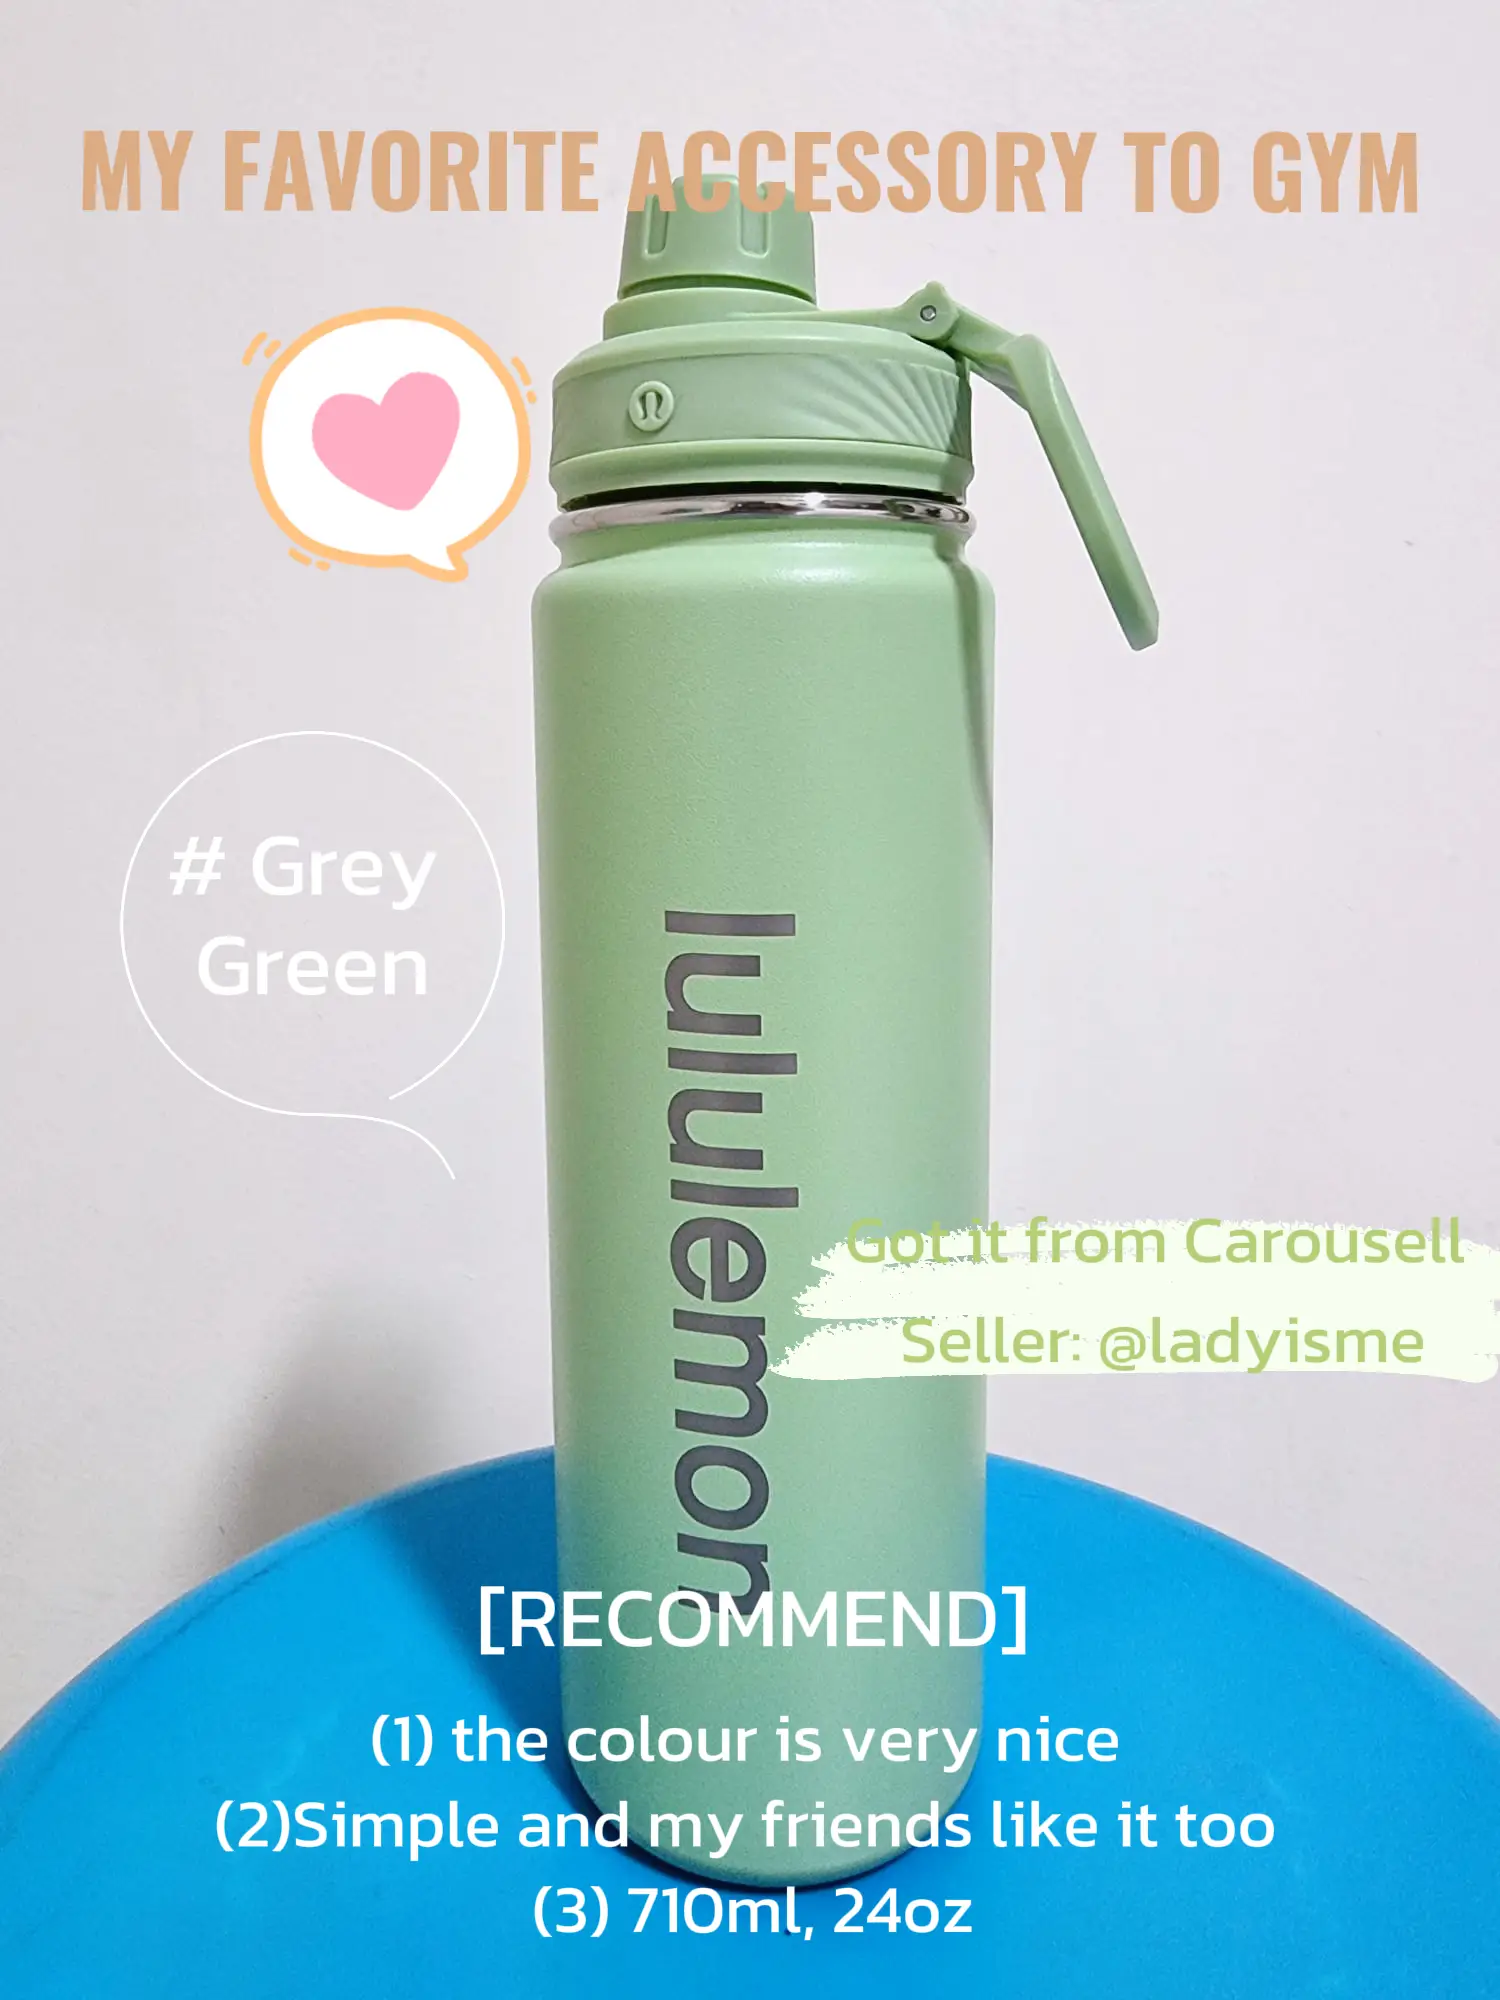 Lululemon Back to Life Sport Water Bottle - clothing & accessories